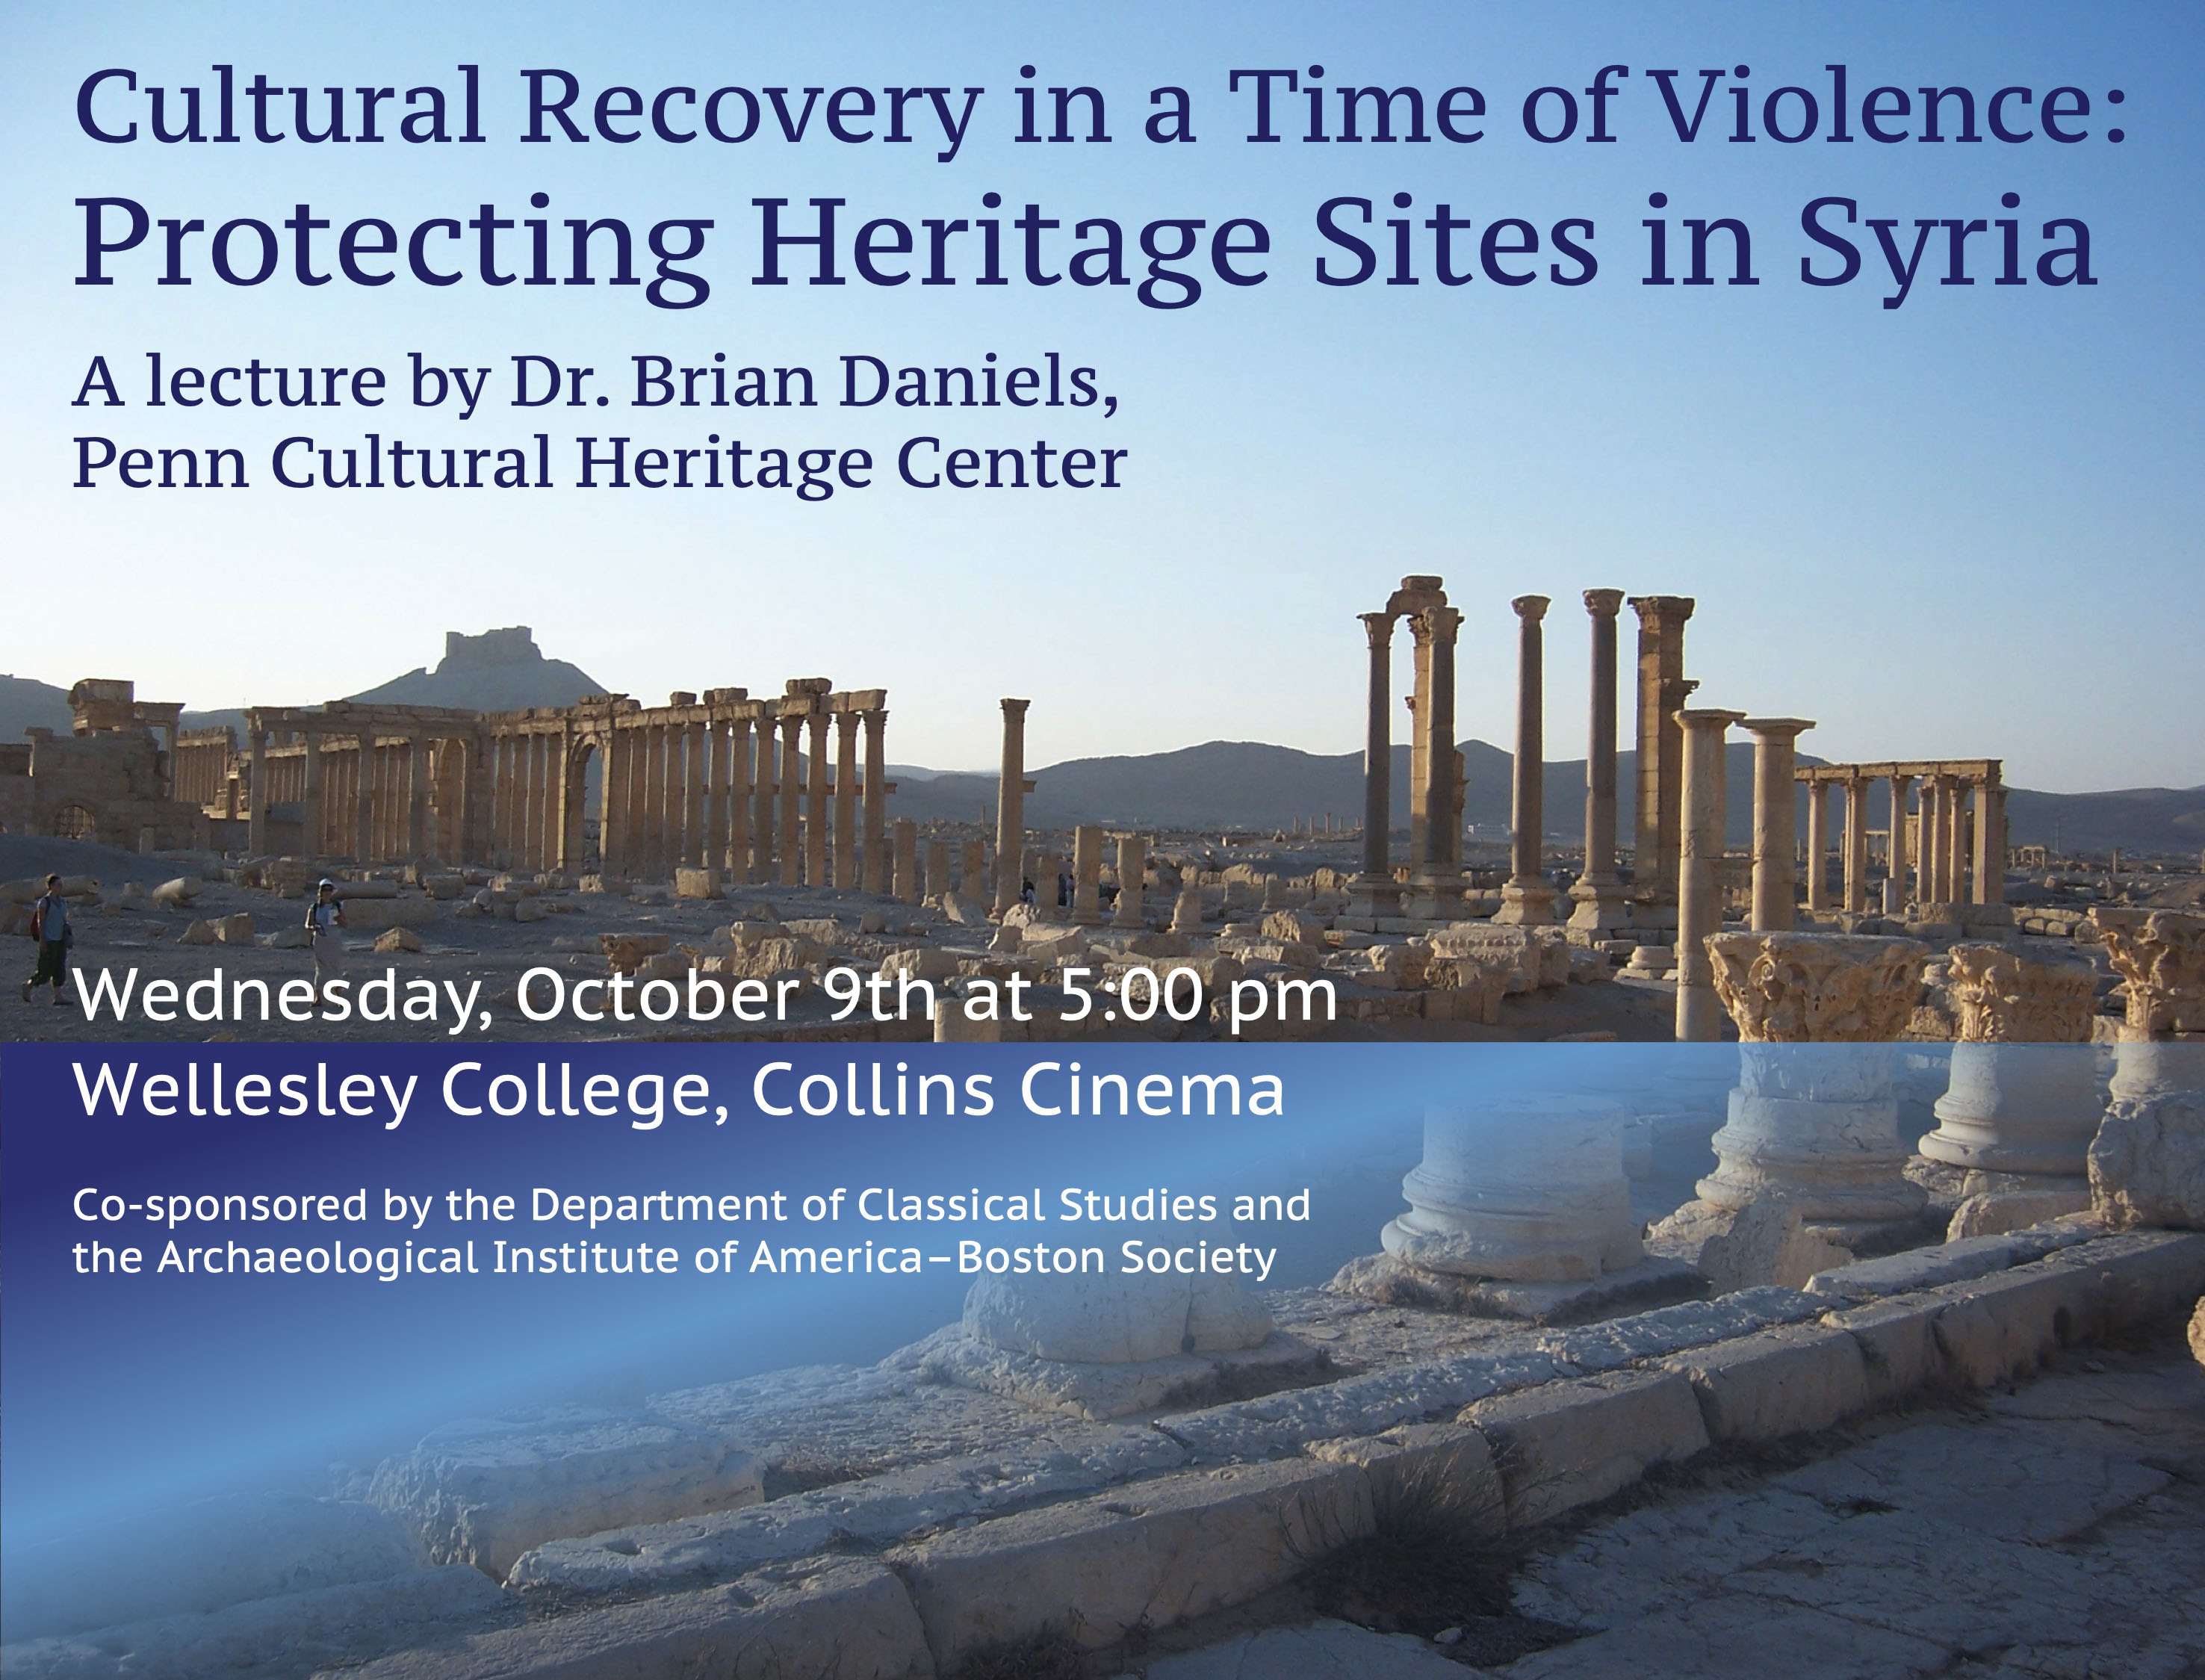 Cultural Recovery in a Time of Violence: Protecting Heritage Sites in Syria